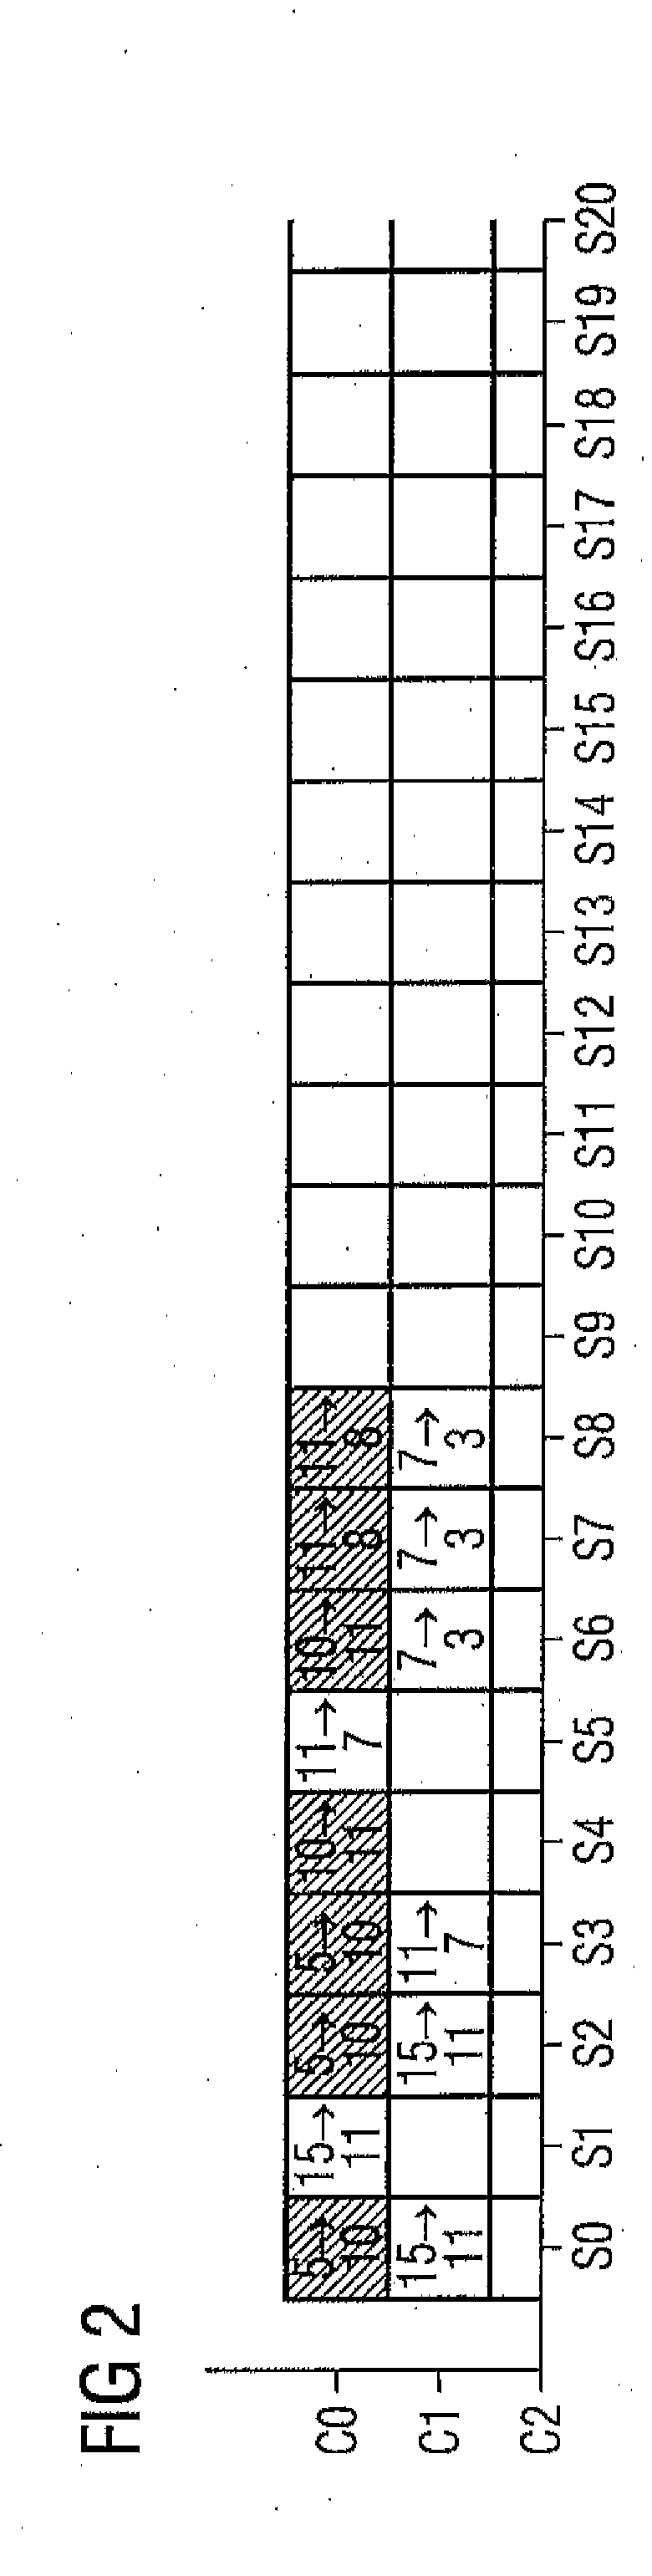 Method for Associating Time Slots with Links Between Network Nodes of a Wireless Interconnected Network